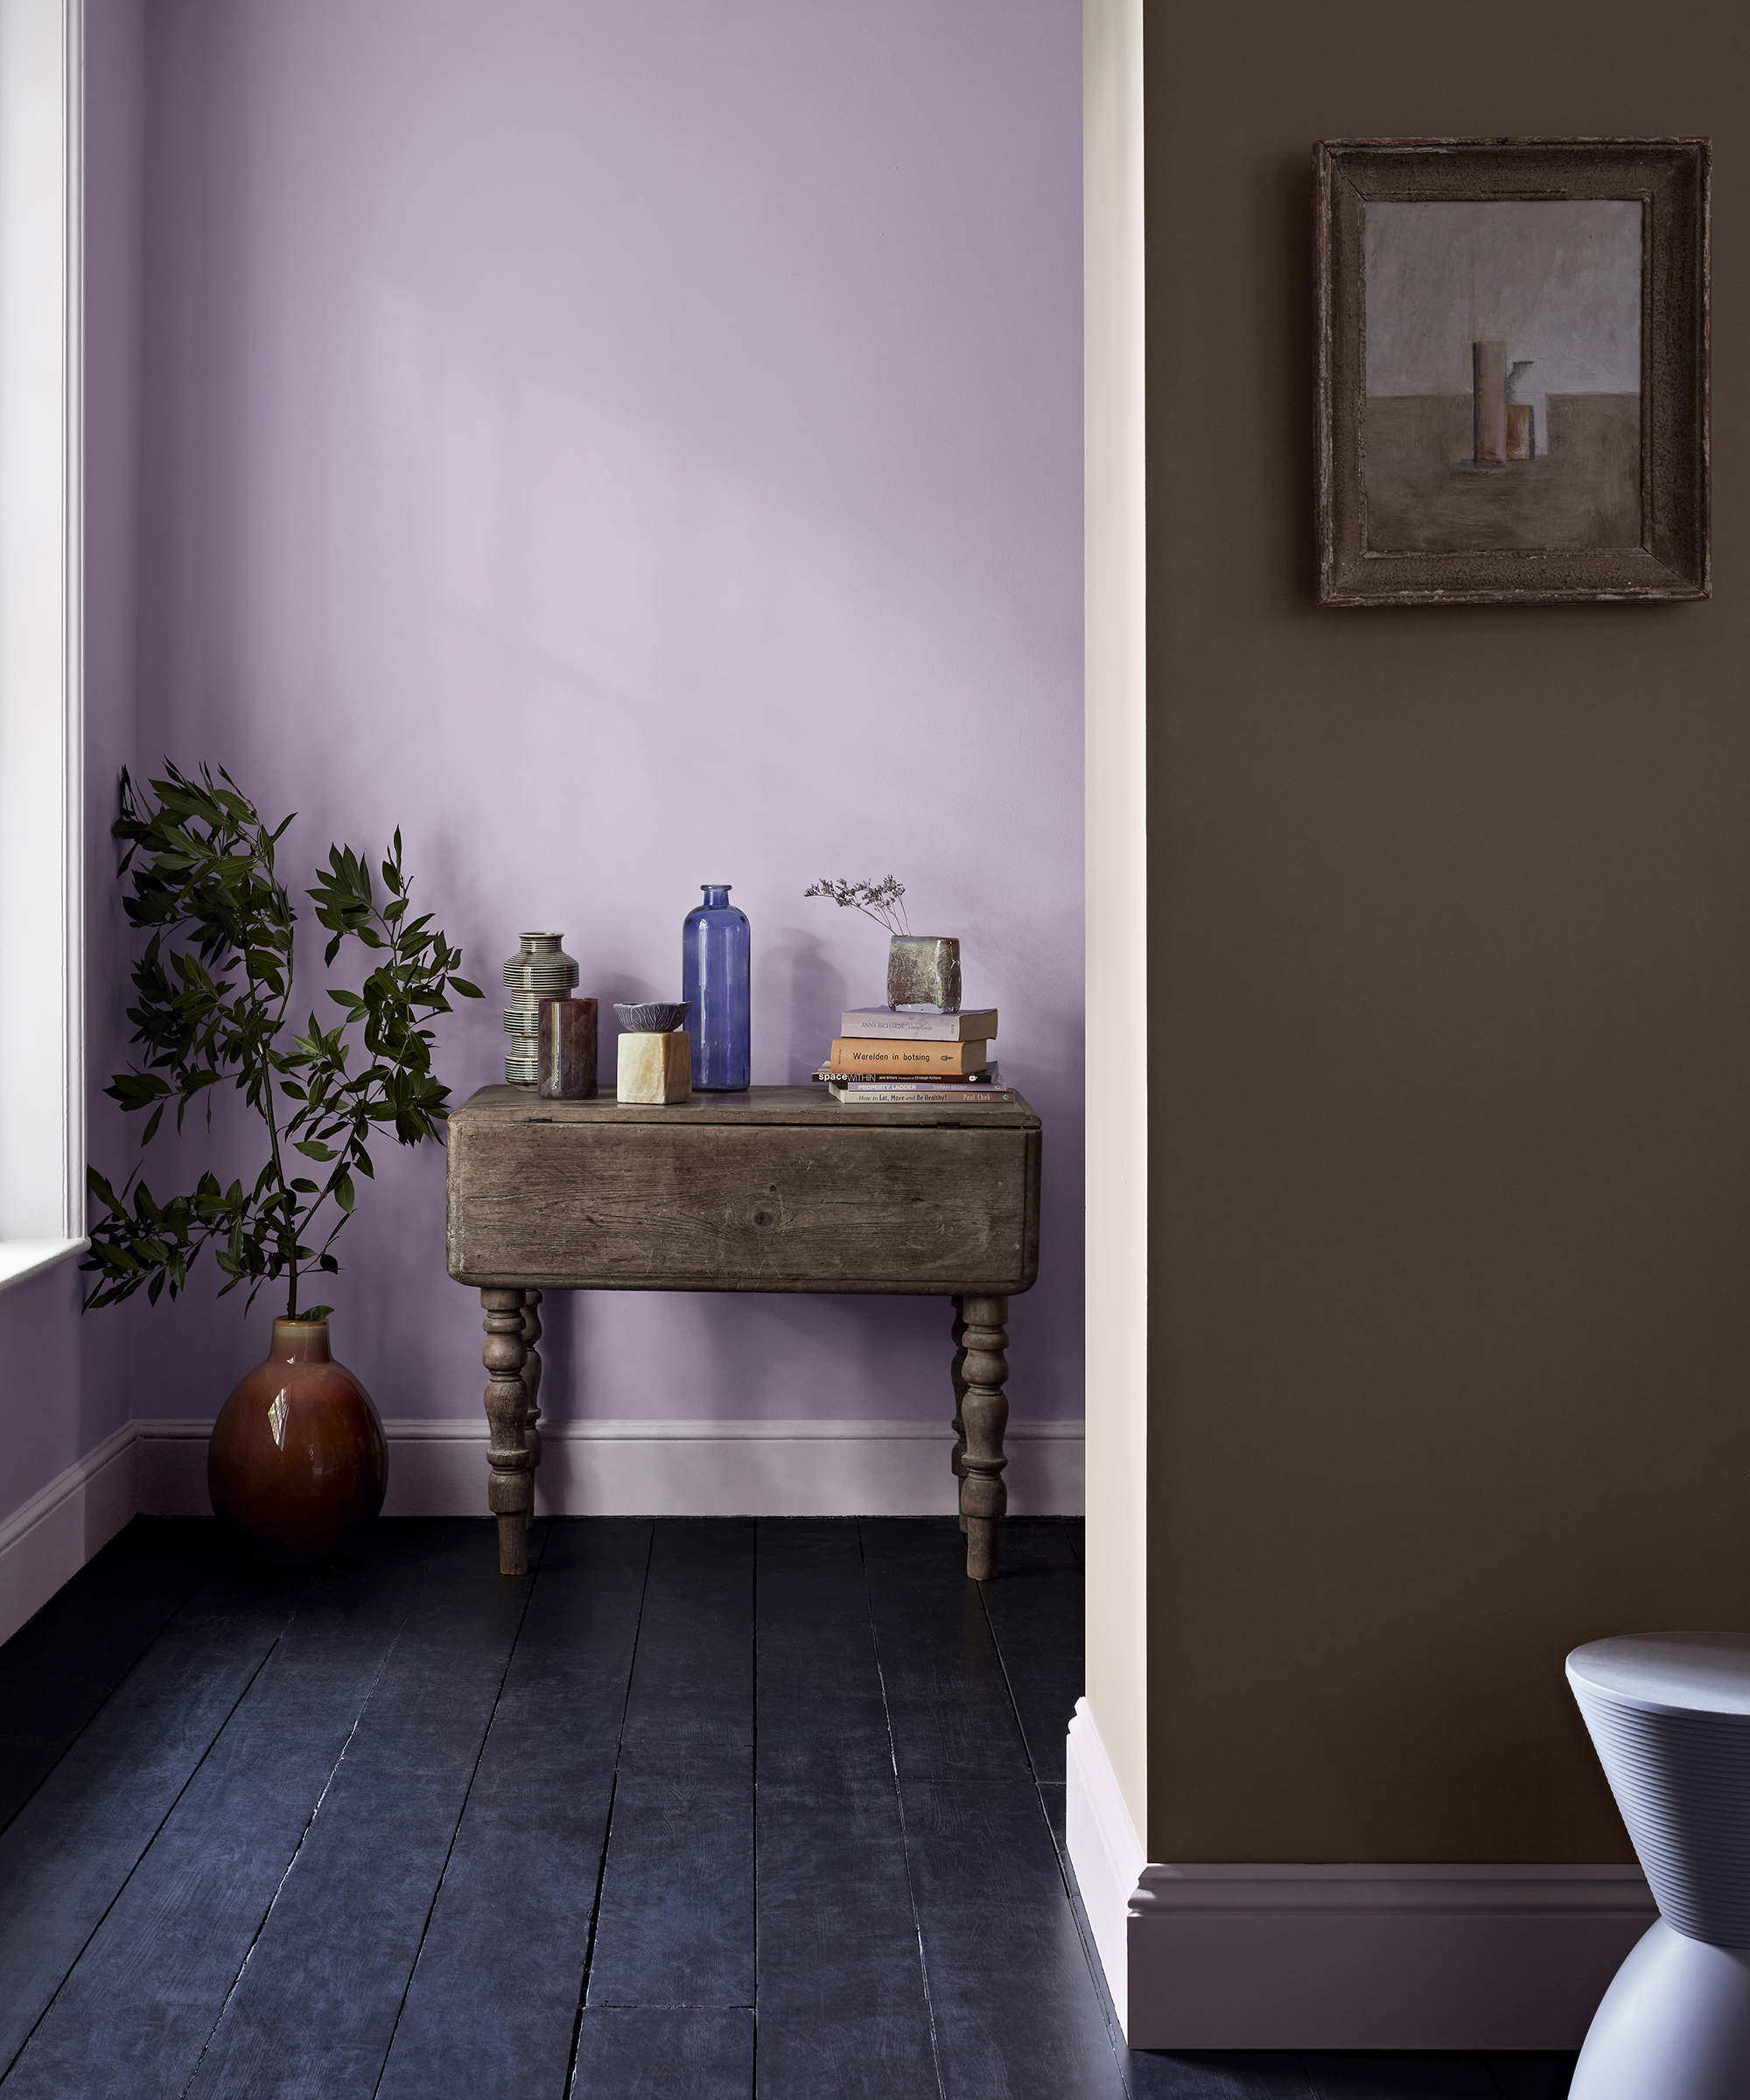 Hallway idea by Crown Paints using shades Lavender Cupcake and Picnic Basket, Both Matt Emulsion, from £14 for 2.5L